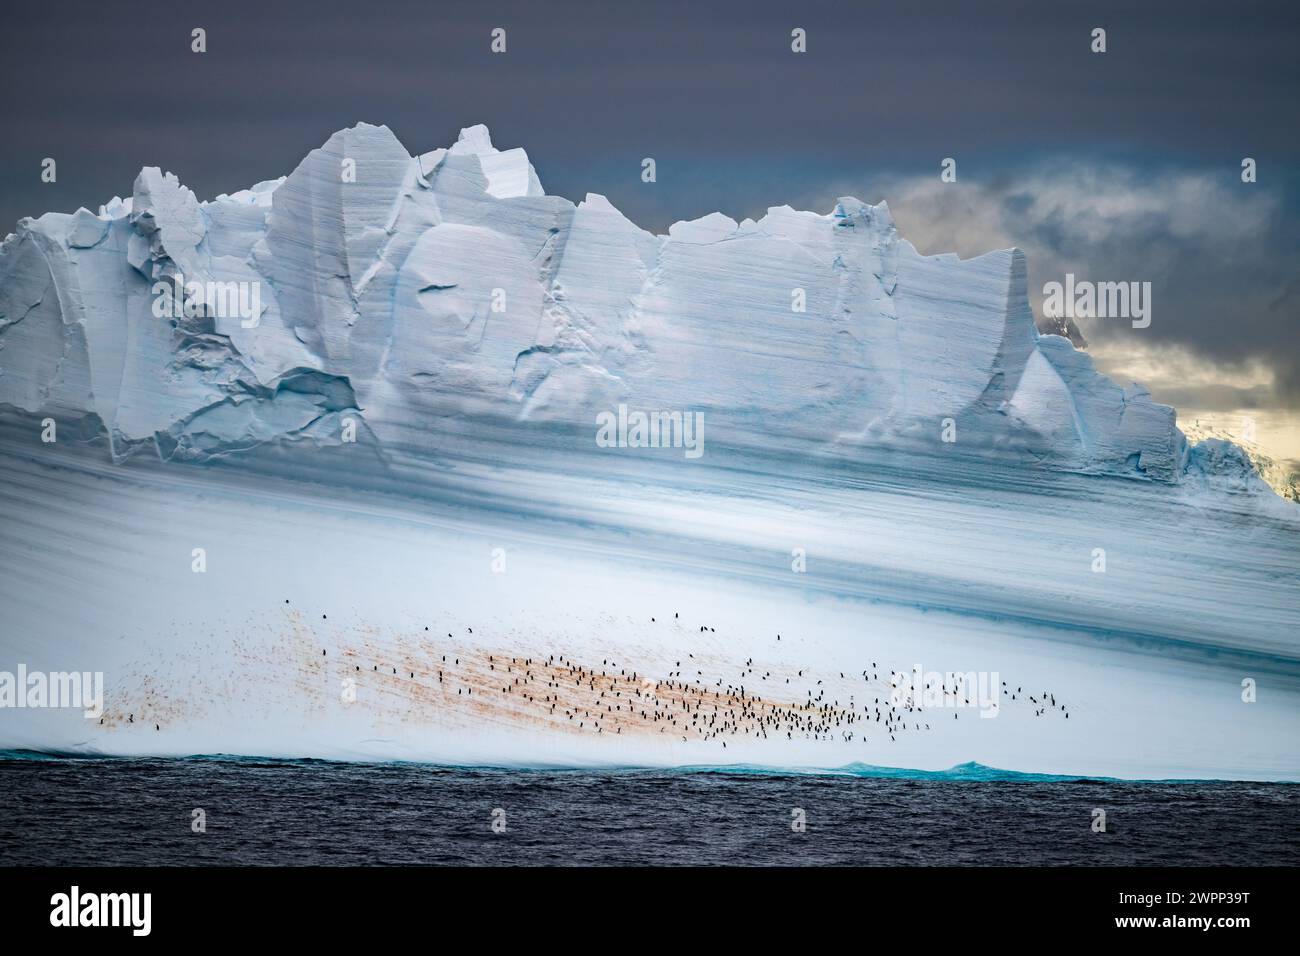 A group of penguins resting on a floating iceberg. Antarctica. Stock Photo